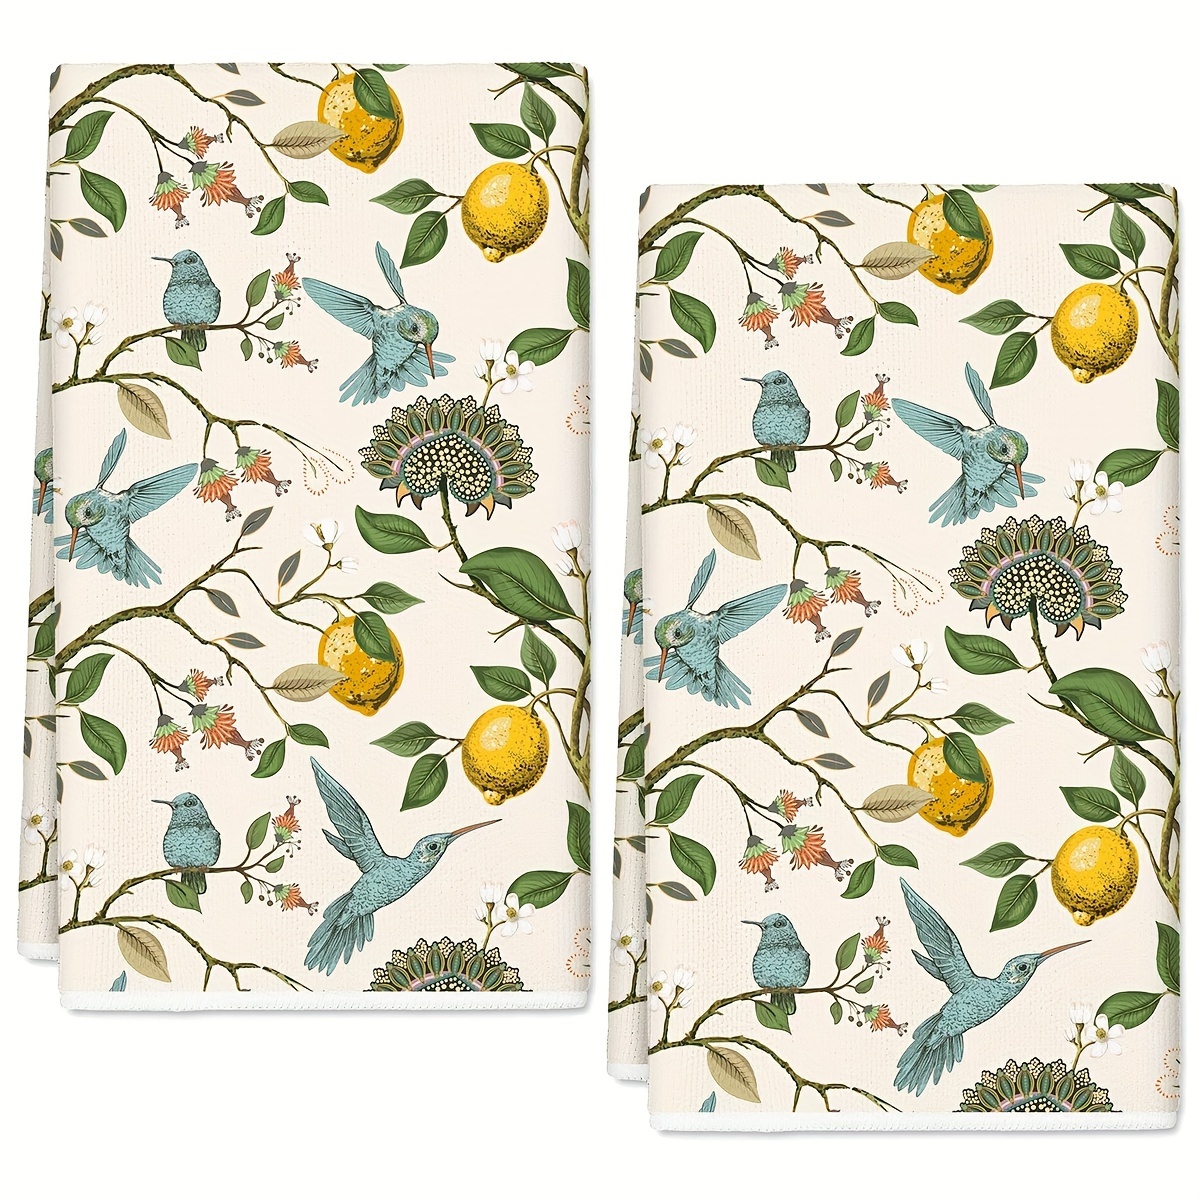 

Vintage Bird And Lemon Tree Kitchen Towel Set, 2-pack Microfiber Dish Cloths, Hand Wash Only, Woven Lightweight Tea Towels, 18x26 Inch, Decorative Seasonal Autumn Dish Towels For Cooking & Baking